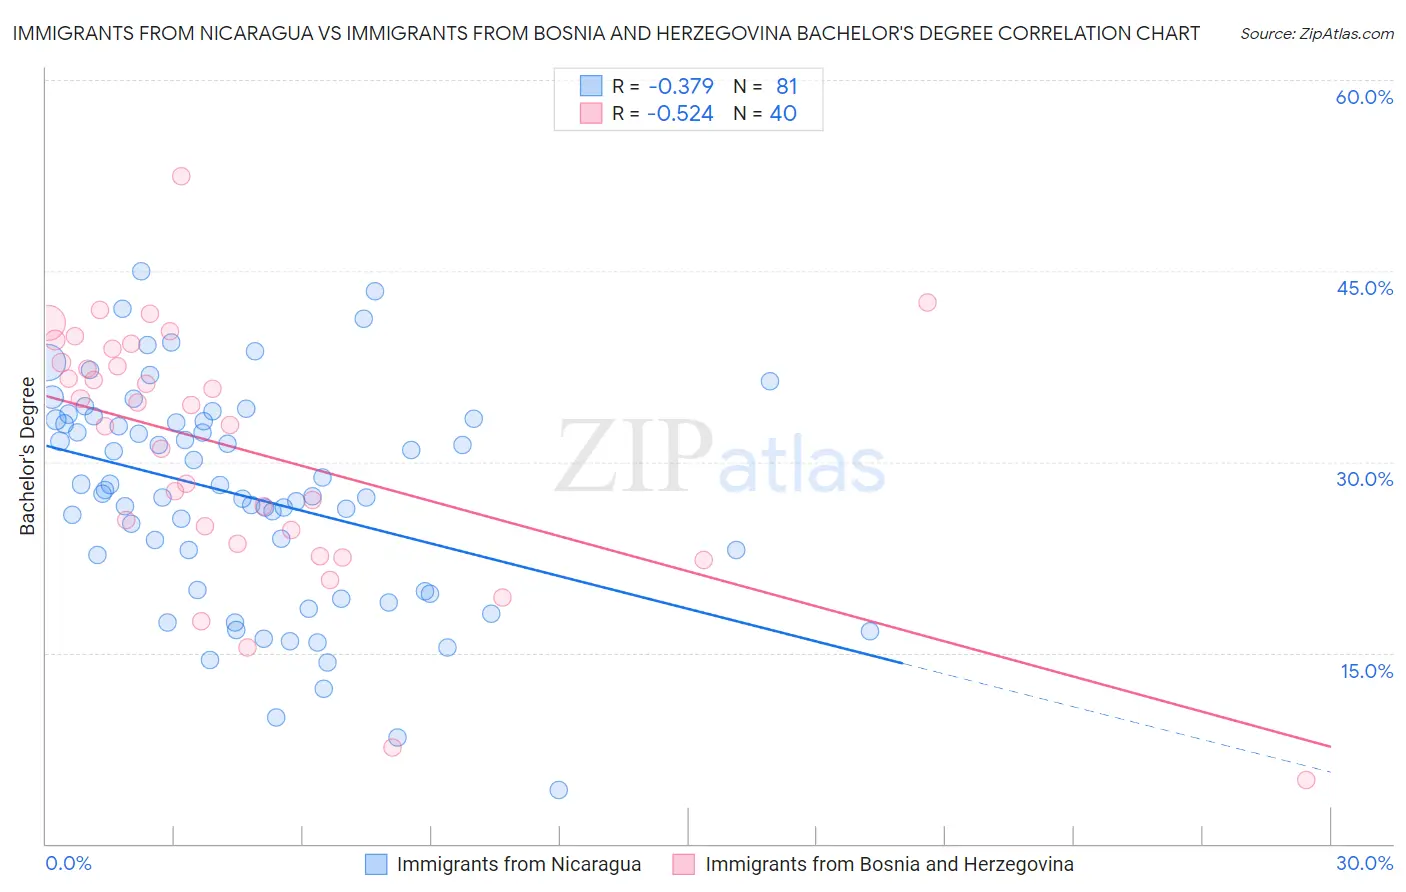 Immigrants from Nicaragua vs Immigrants from Bosnia and Herzegovina Bachelor's Degree